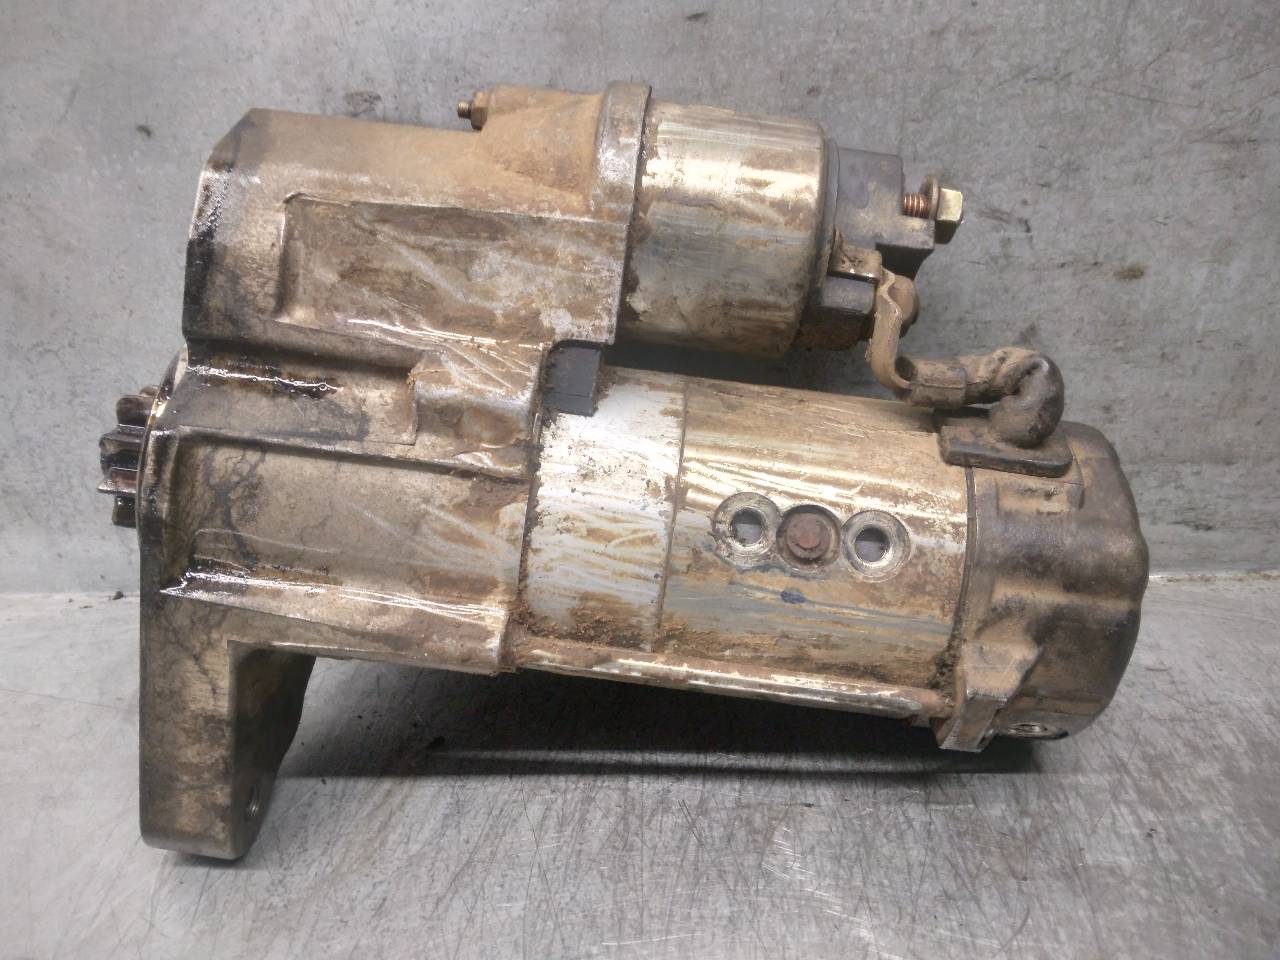 LAND ROVER Discovery 3 generation (2004-2009) Starter Motor NAD500080, MS4280001941, DENSO 24220696